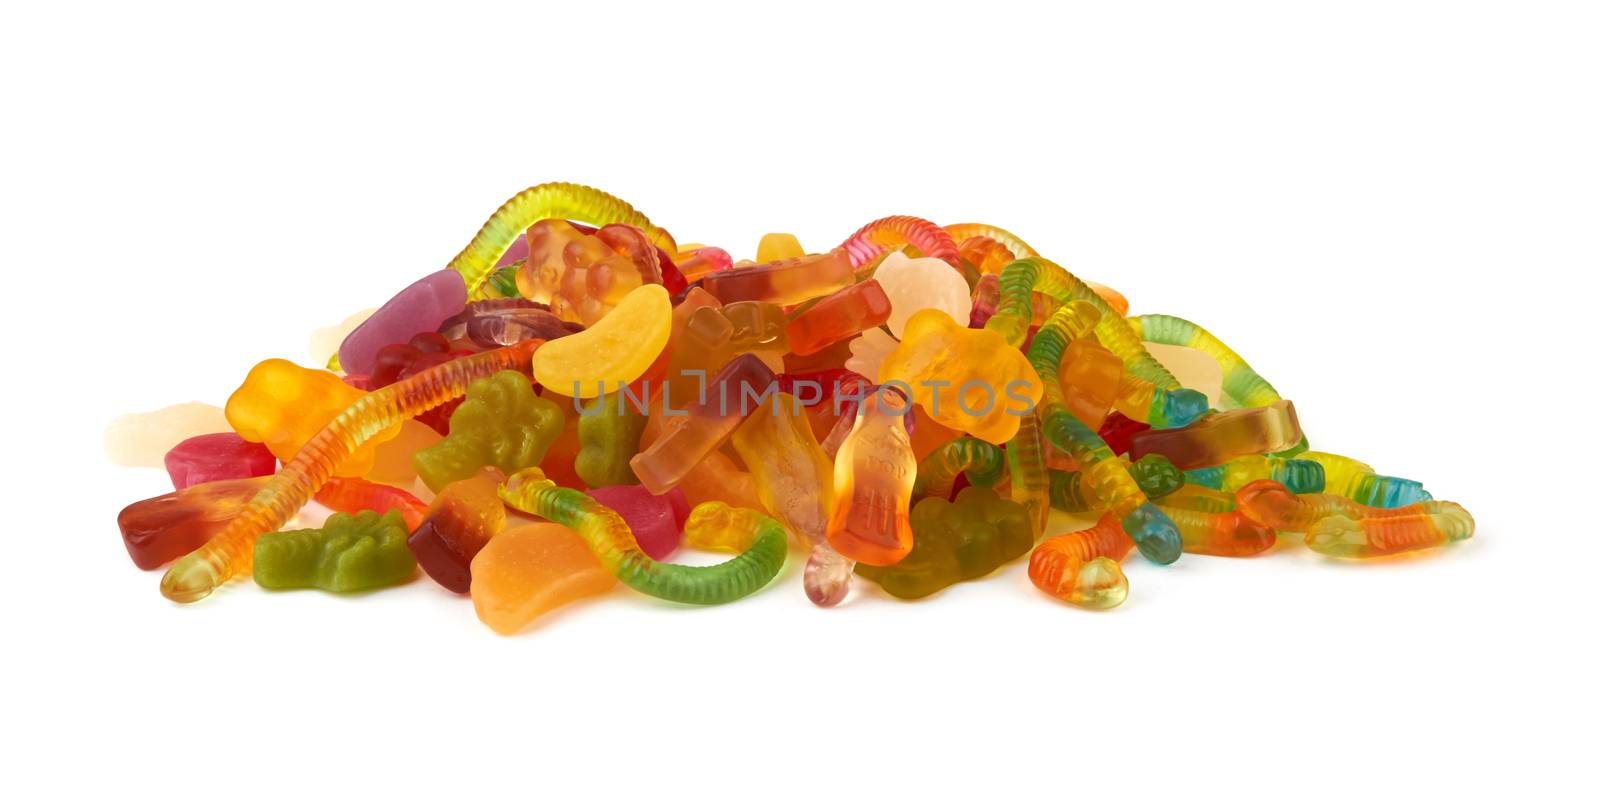 neon gummy candies by pioneer111